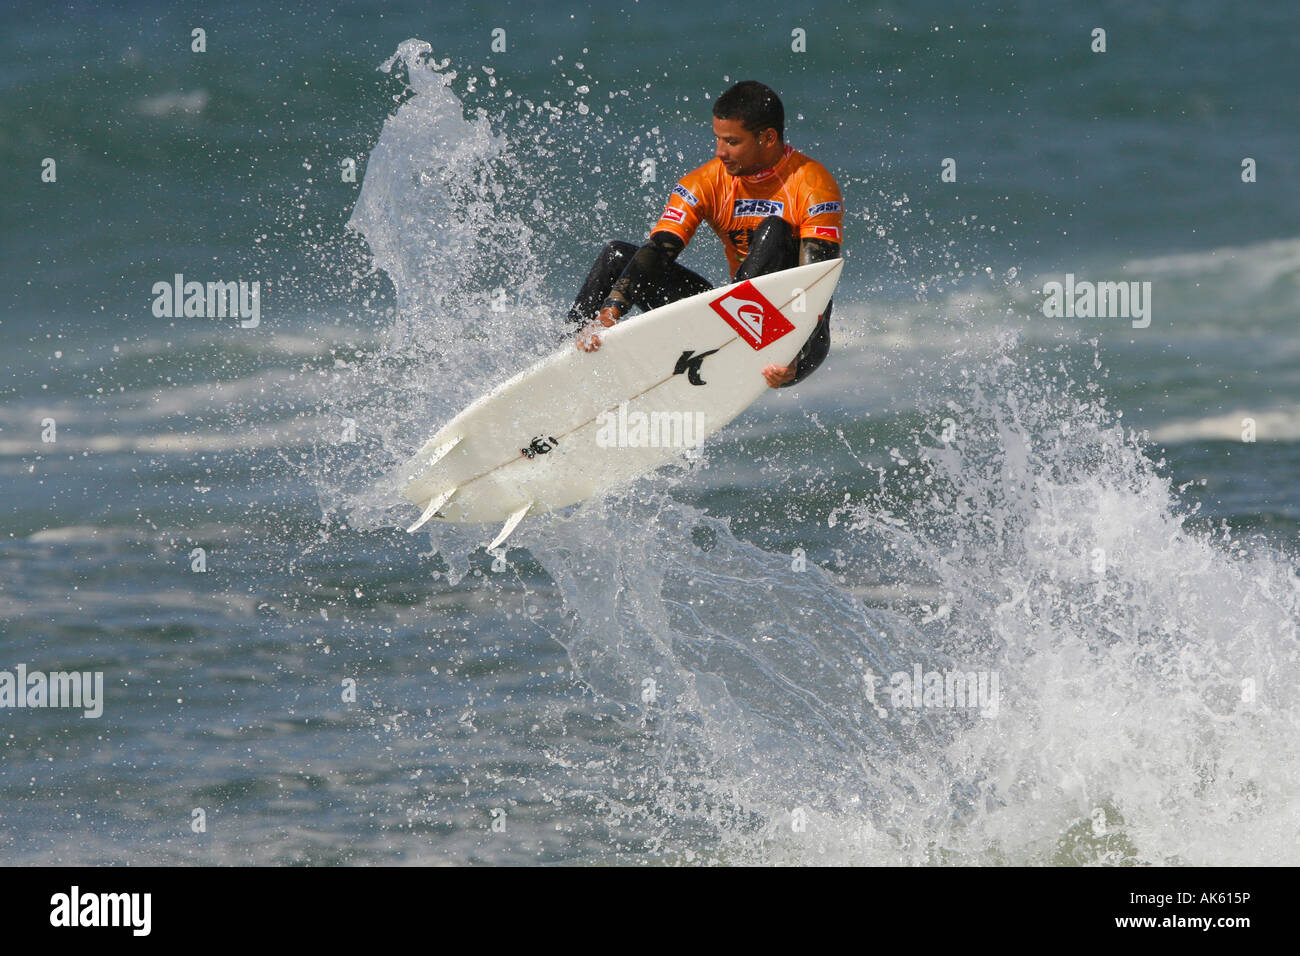 Pro surfer Michel Bourez of Tahiti surfs a wave during the ASP Quiksilver Pro France 2007 in Hossegor Stock Photo